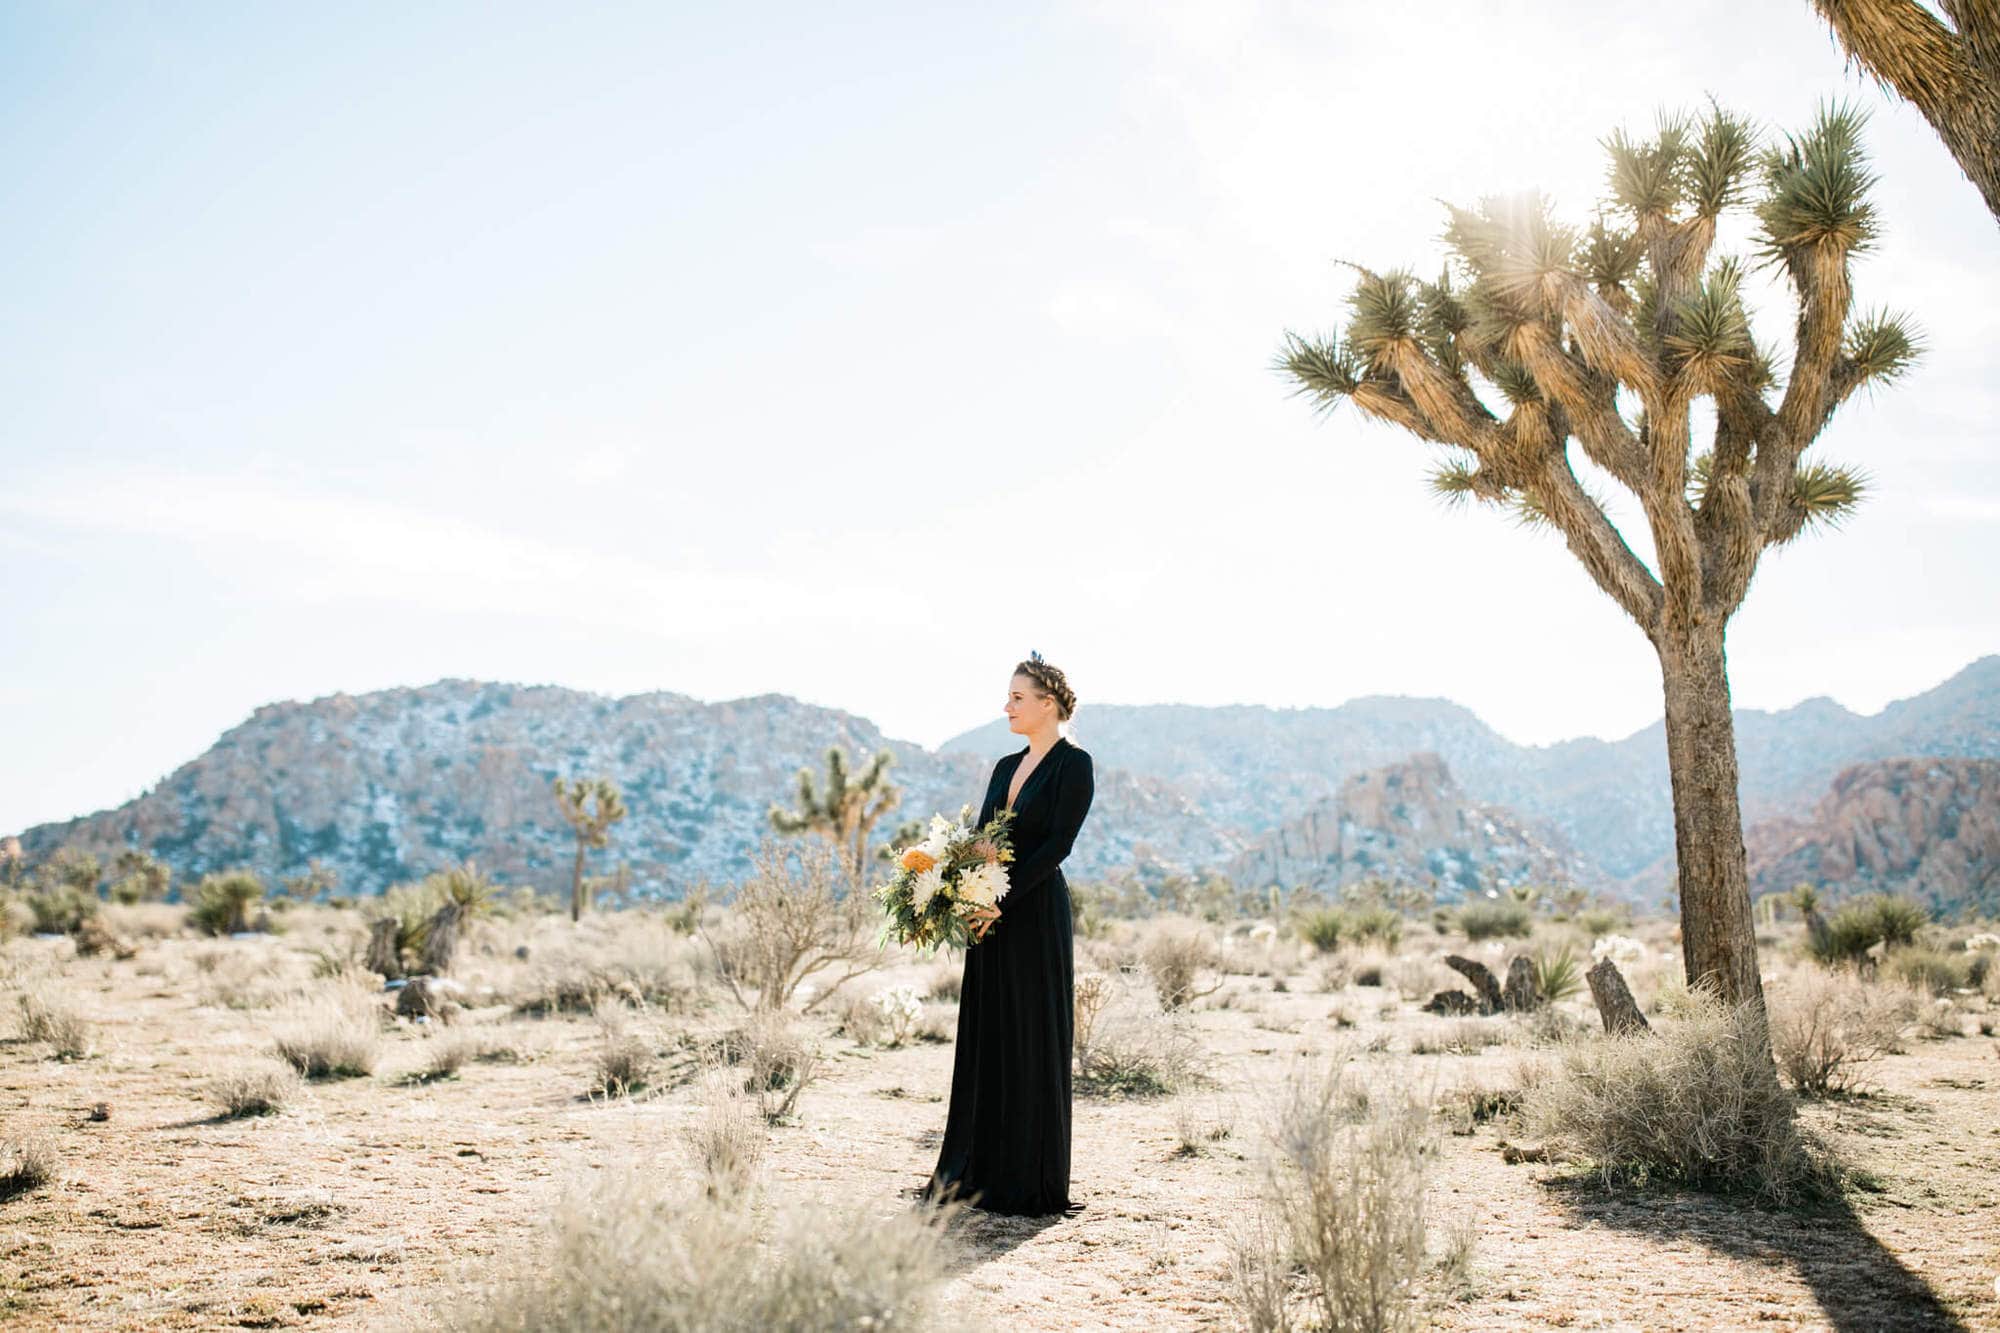 A bride in a black wedding dress holds a beautiful bouquet, standing near a Joshua Tree with mountains in the distance.